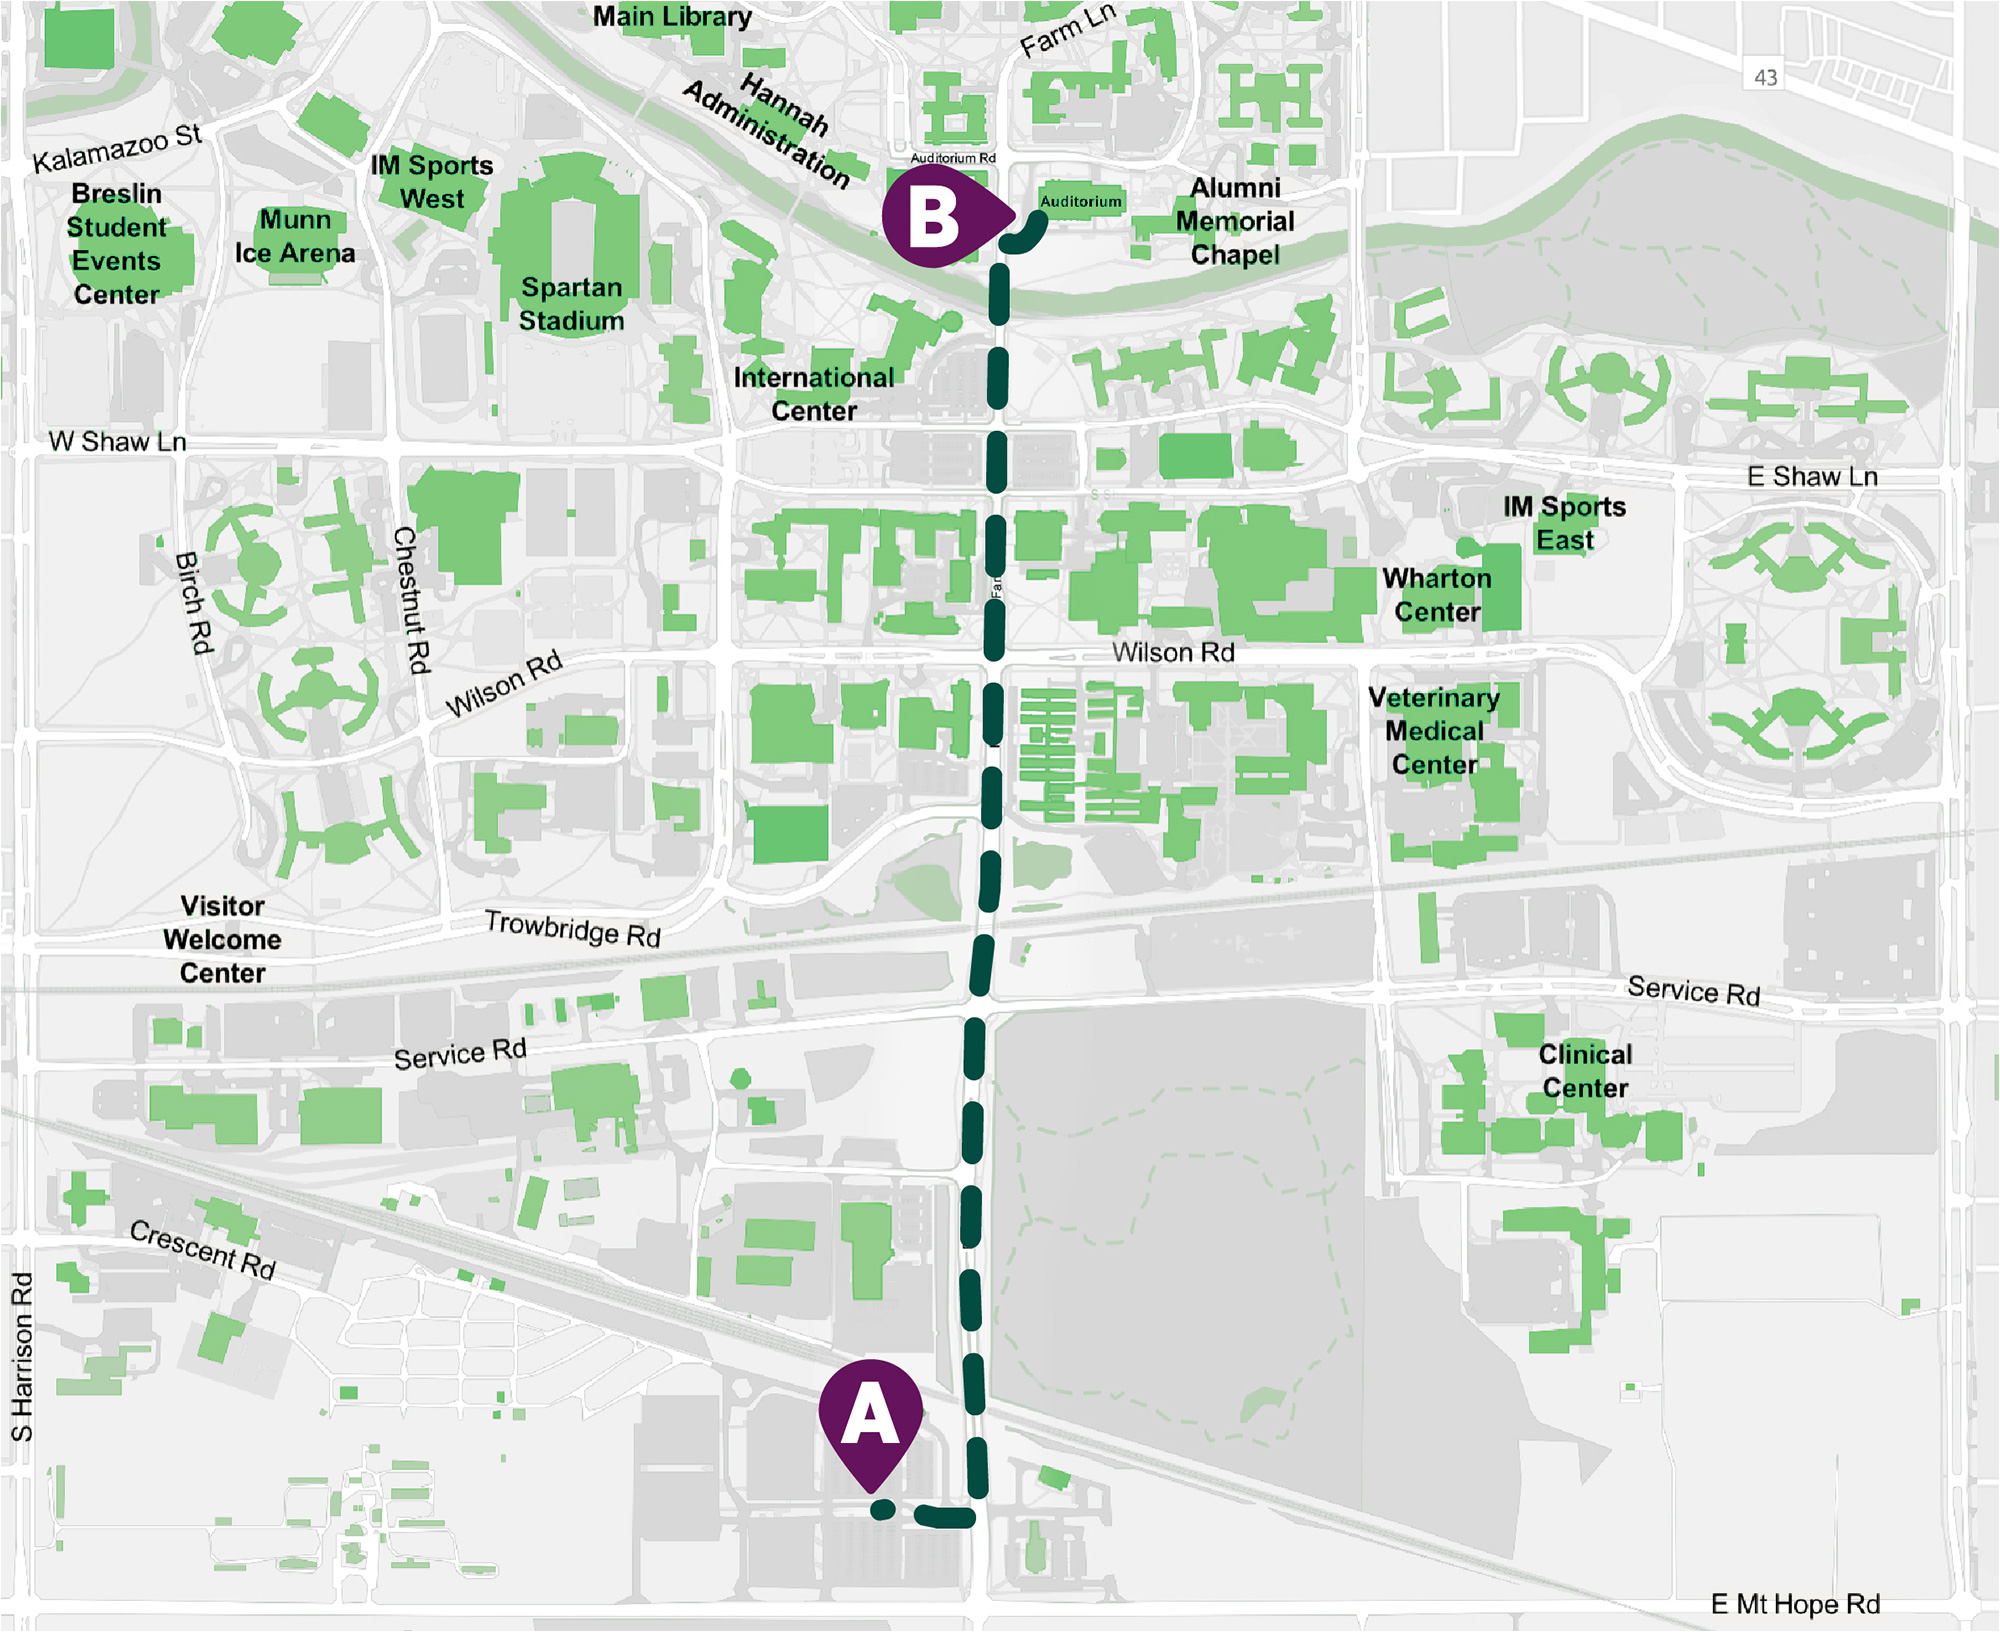 Campus map showing the route of the autonomous bus, going from point A, lot 89; to point B, the MSU Auditorium.